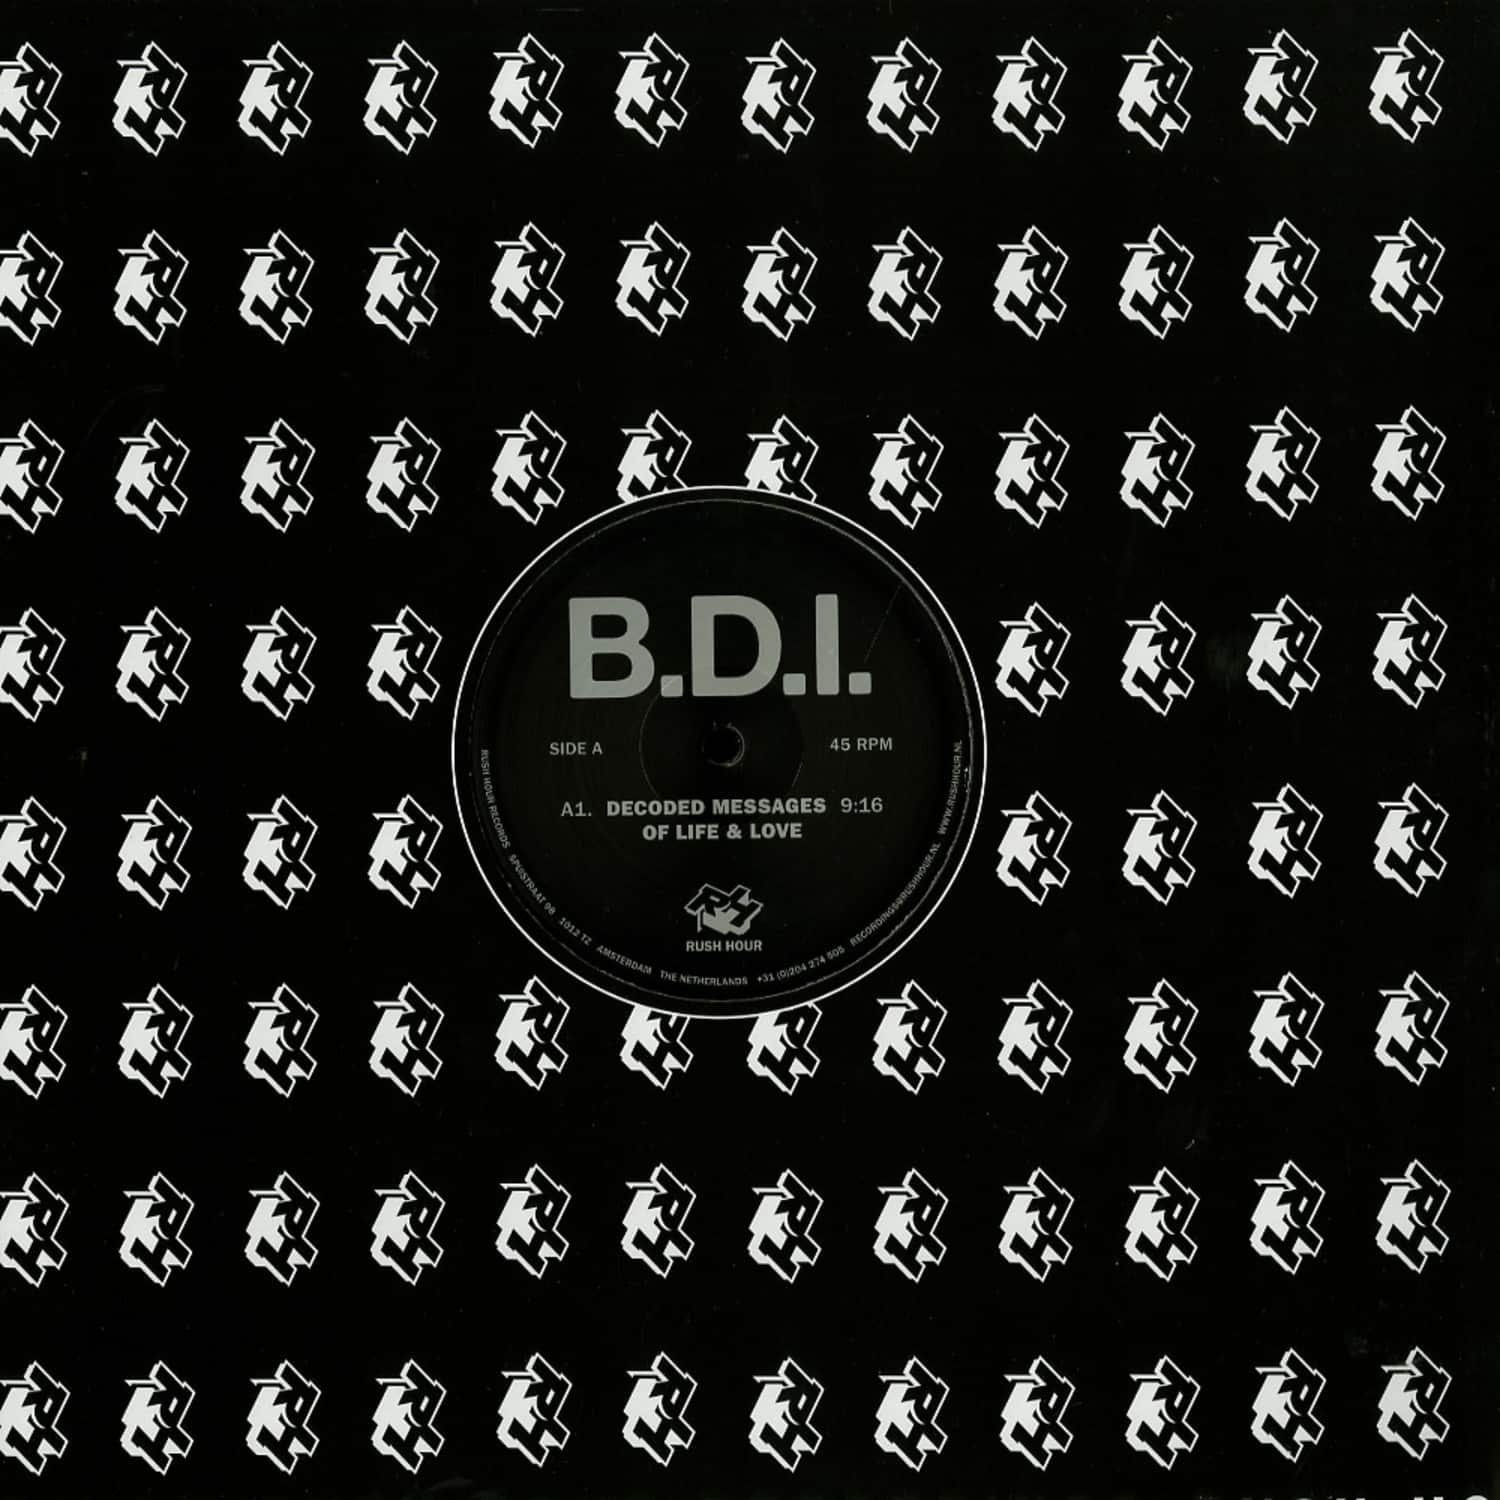 B.D.I. - DECODED MESSAGES OF LIFE & LOVE